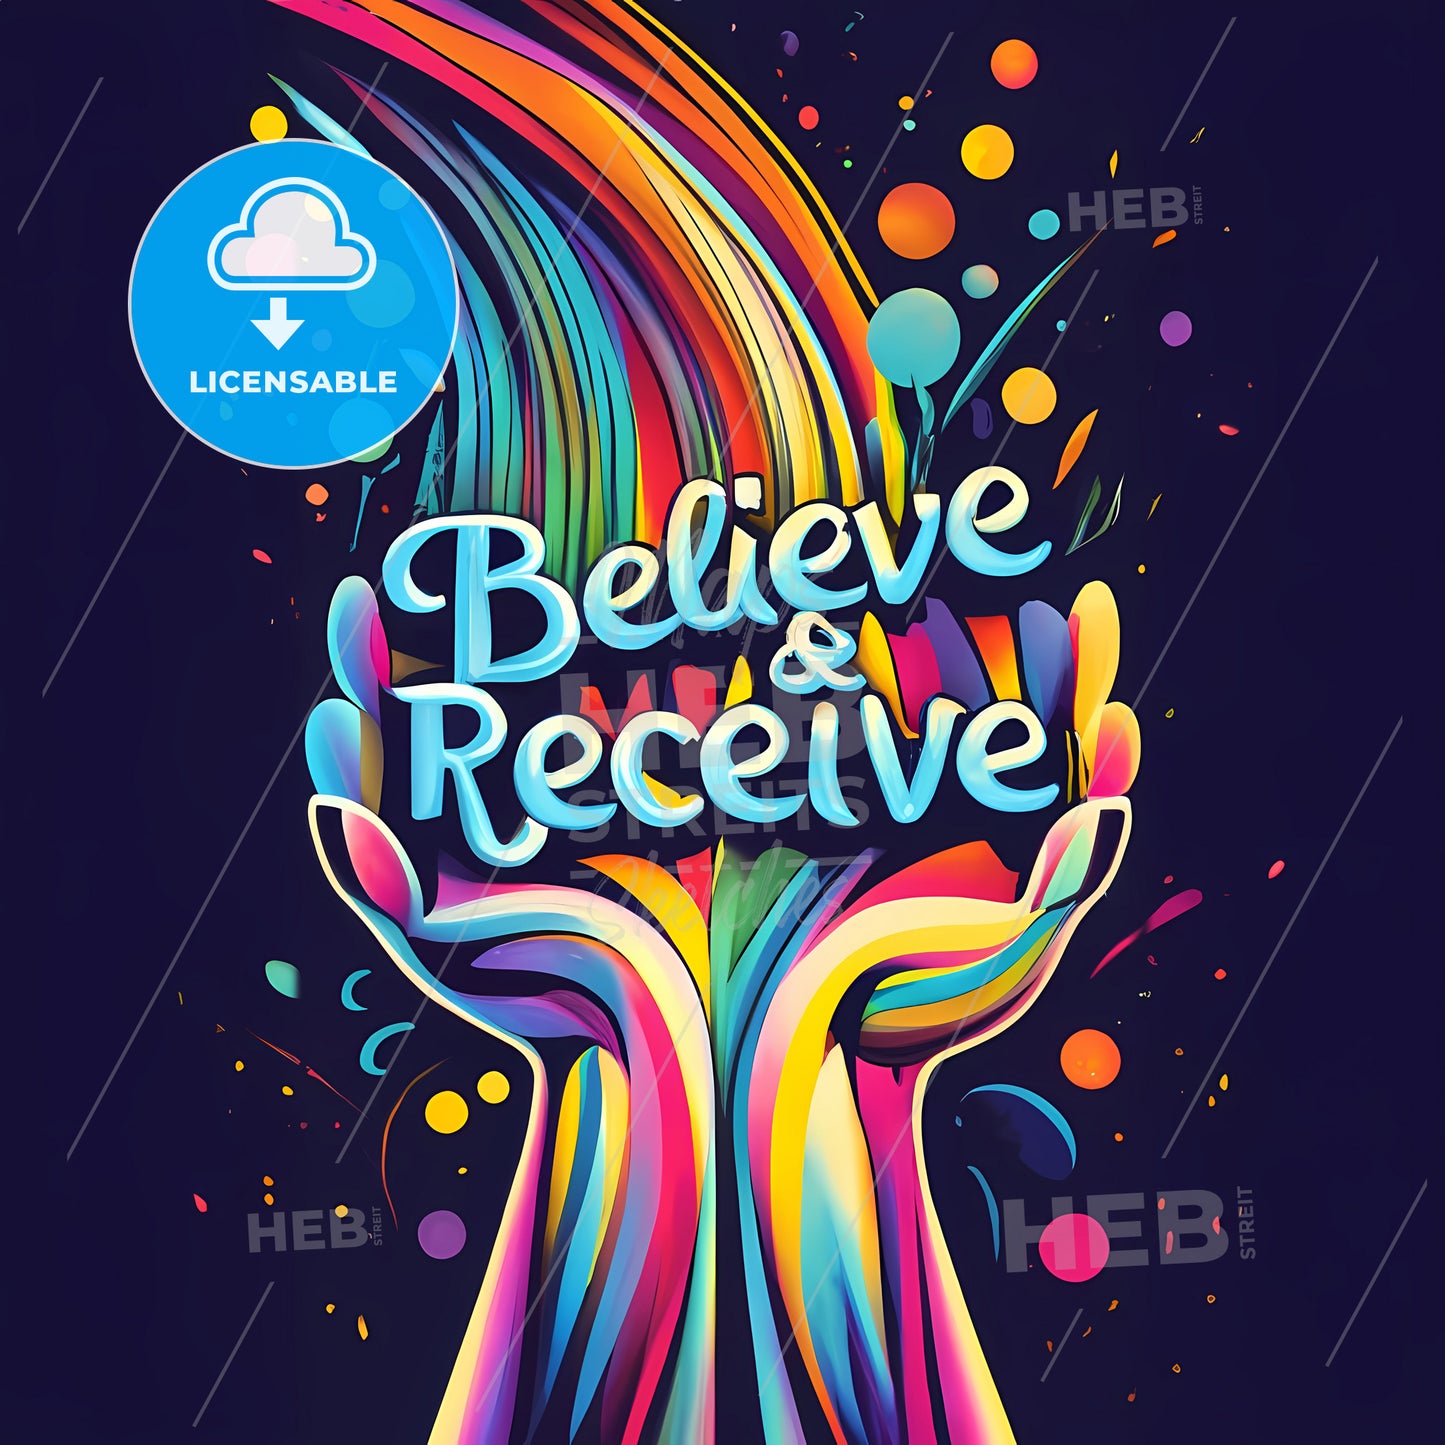 Believe Receive - A Colorful Hands Holding A Rainbow Of Colors